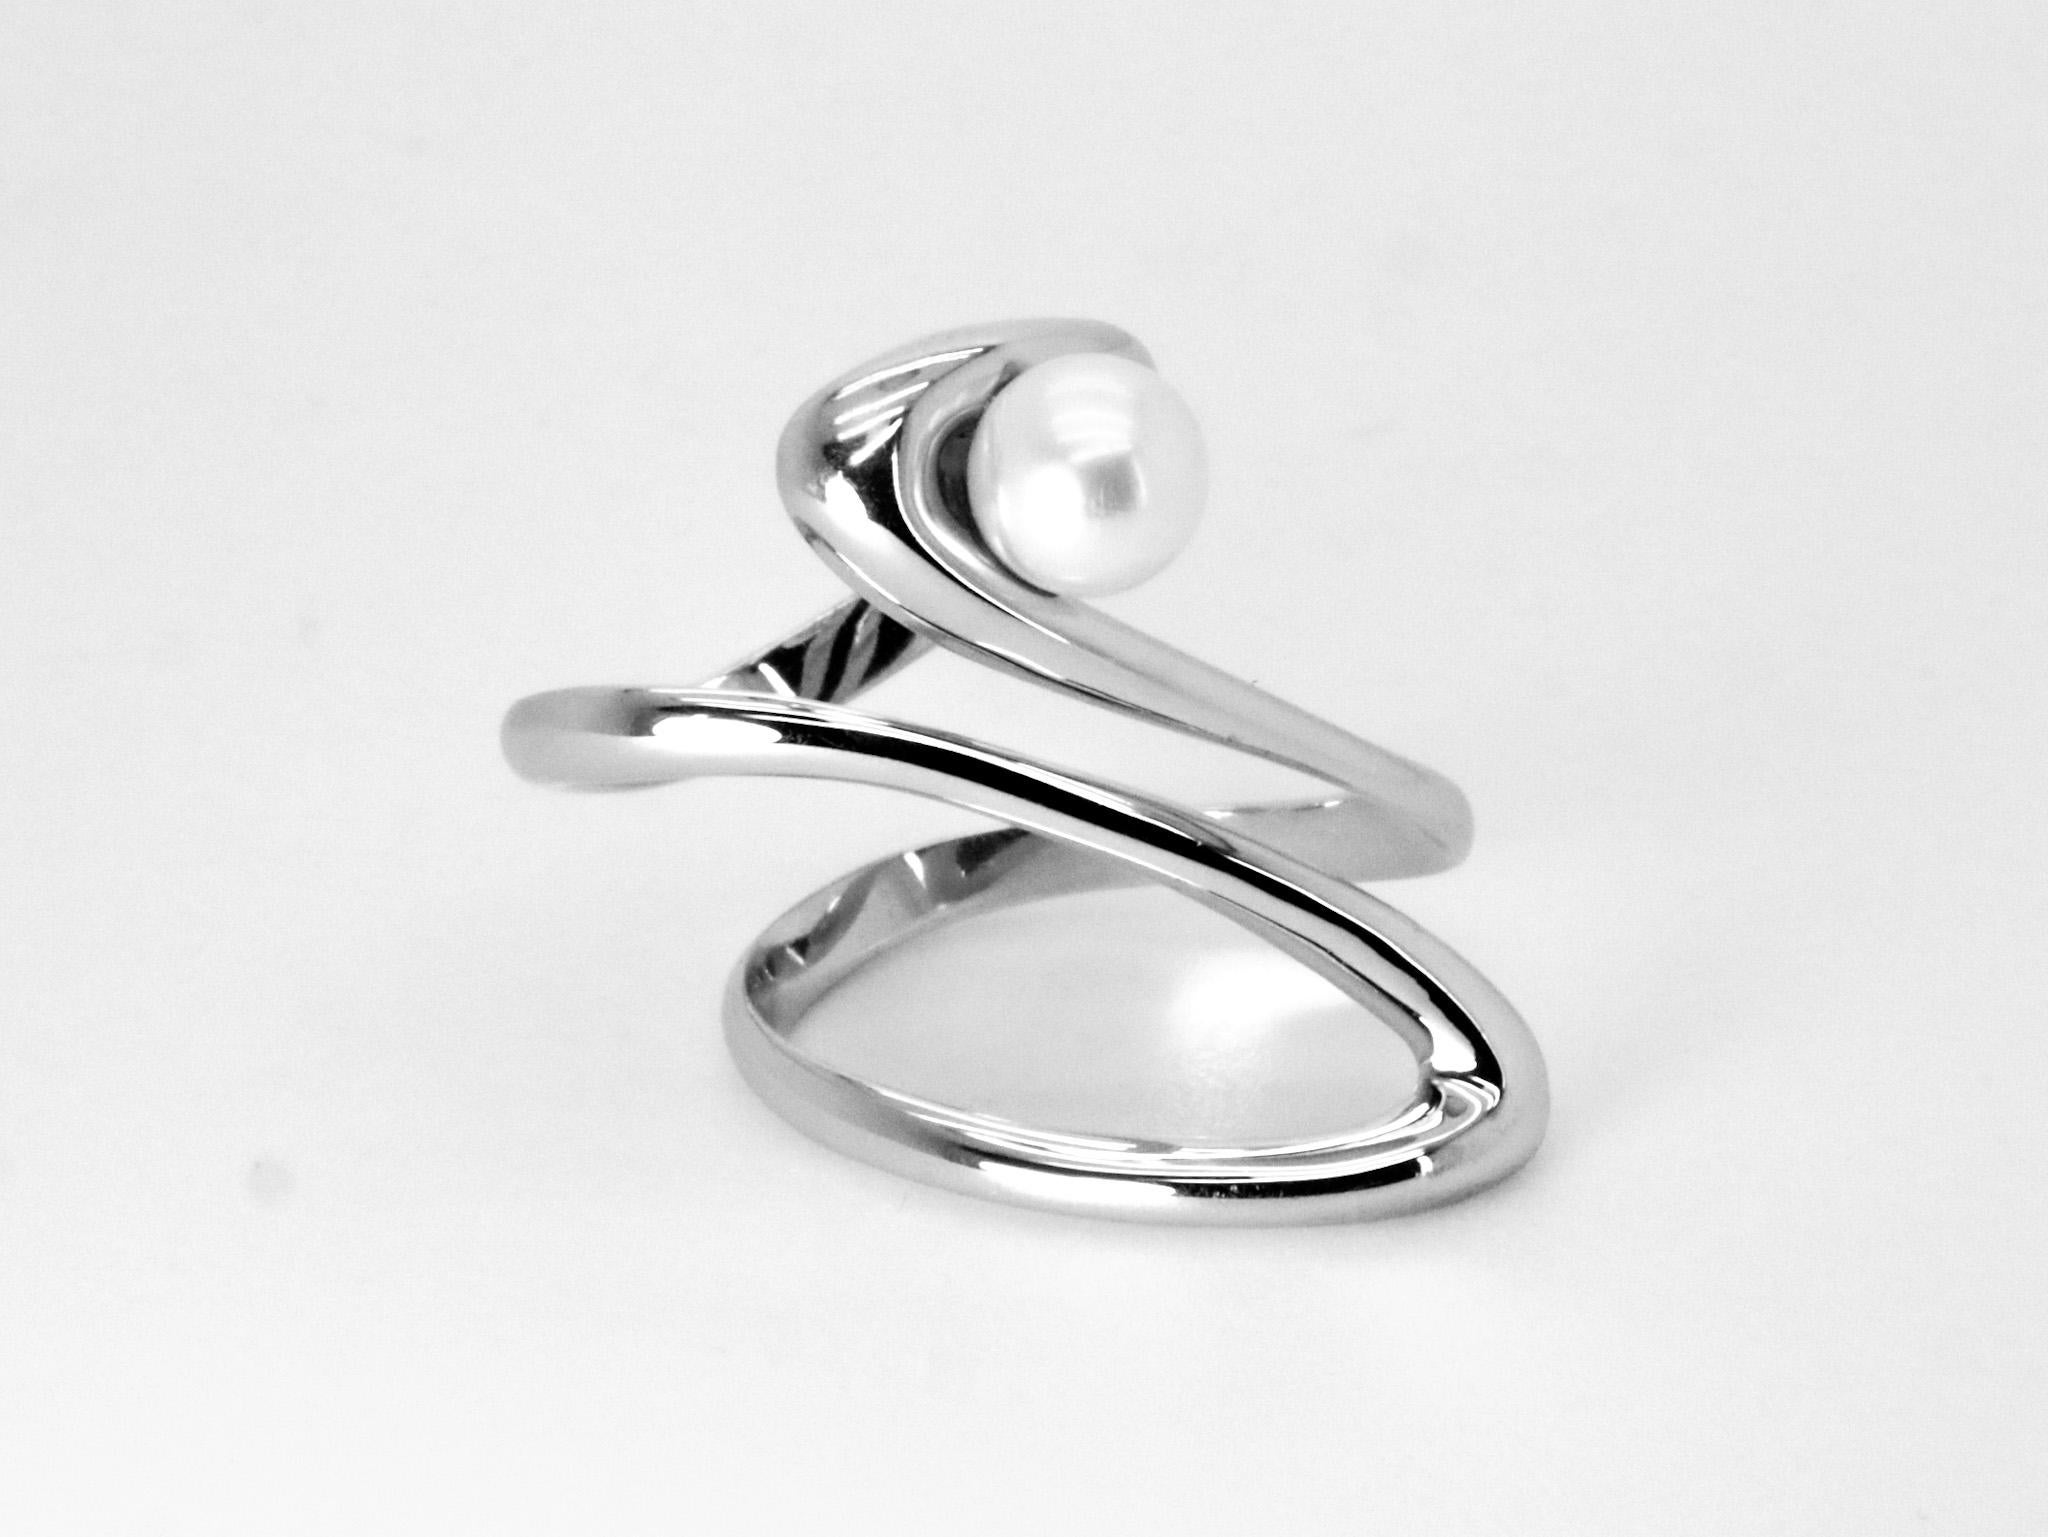 18K White Gold Cosmic Design White Pearl Gemini Beatrice Barzaghi Cocktail Ring For Sale 3